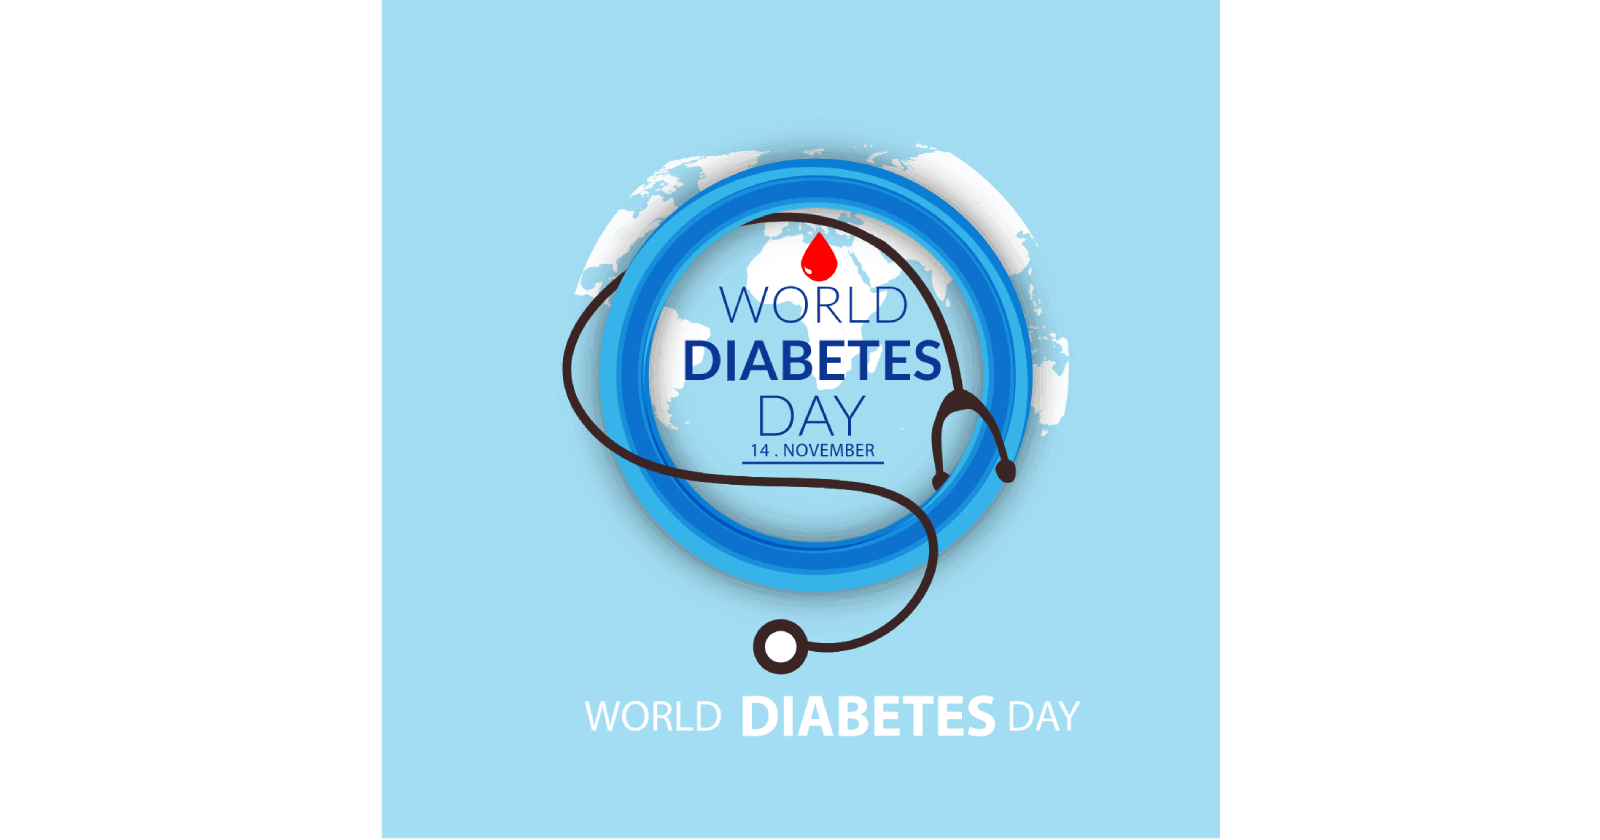 Overview of World Diabetes Day